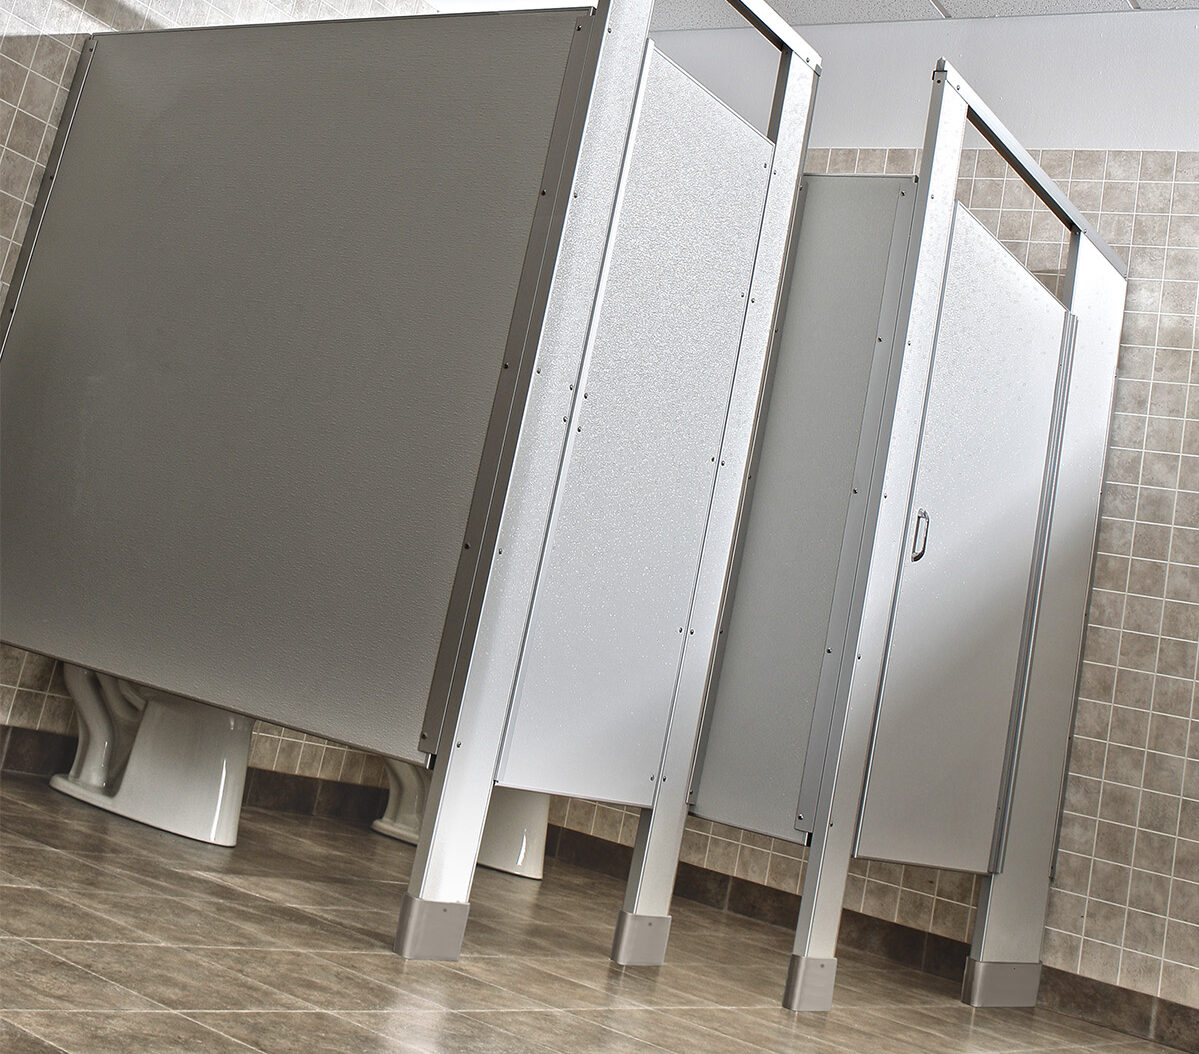 A group of interior stalls made to order in a public restroom.